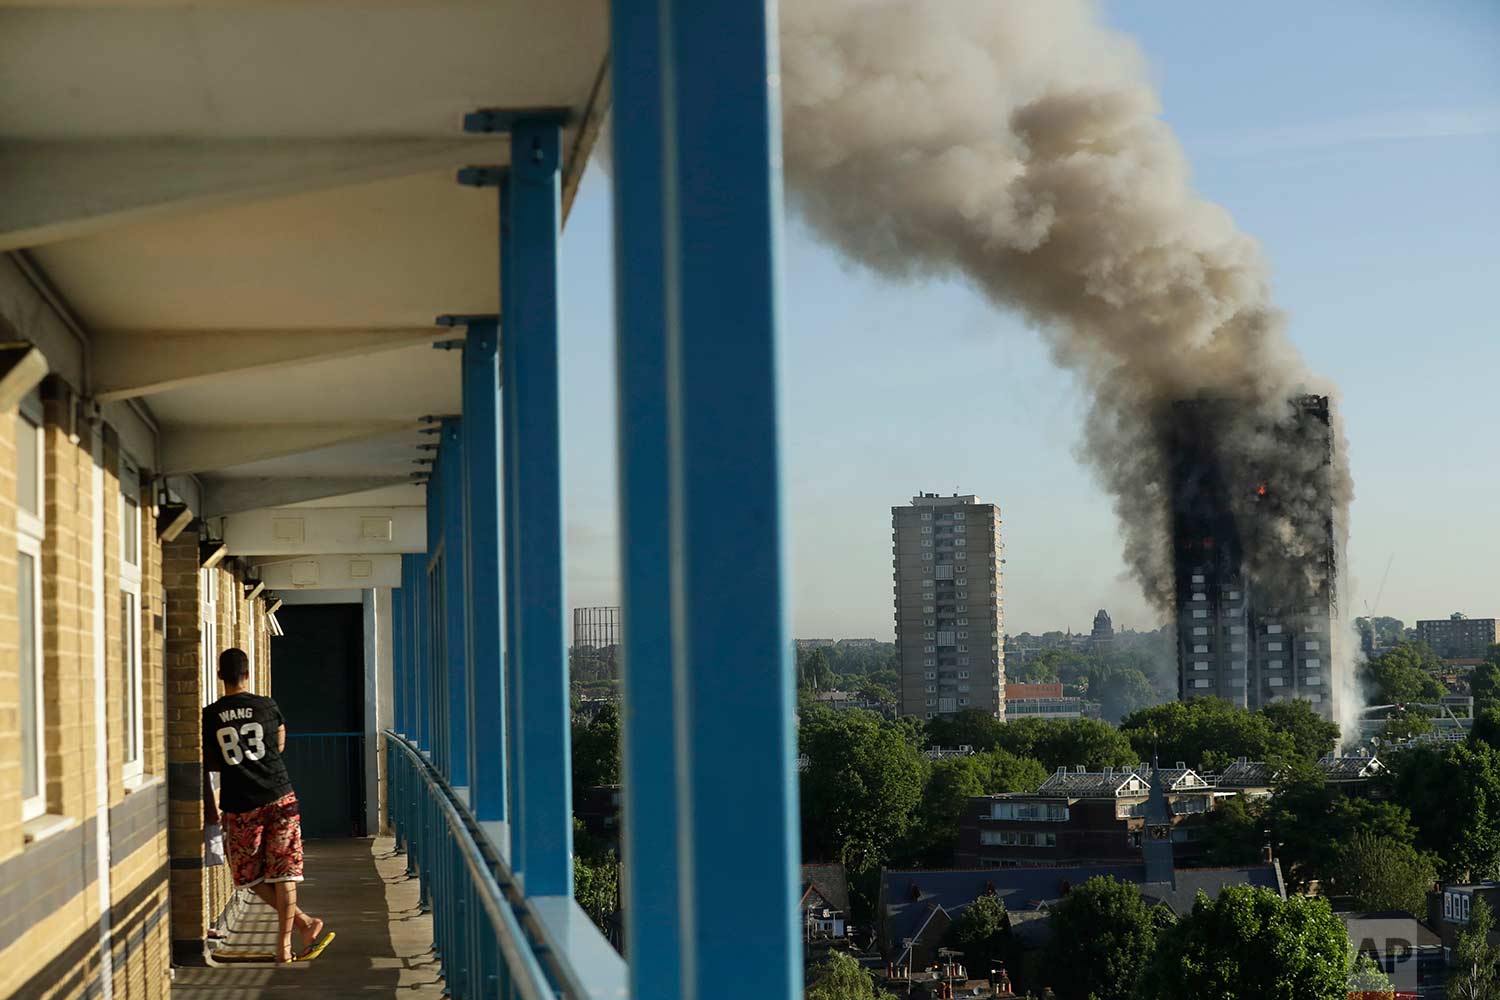  In this Wednesday, June 14, 2017 photo, a resident in a nearby high-rise building watches smoke rise from a massive fire at the high-rise Grenfell Tower in London. (AP Photo/Matt Dunham) 